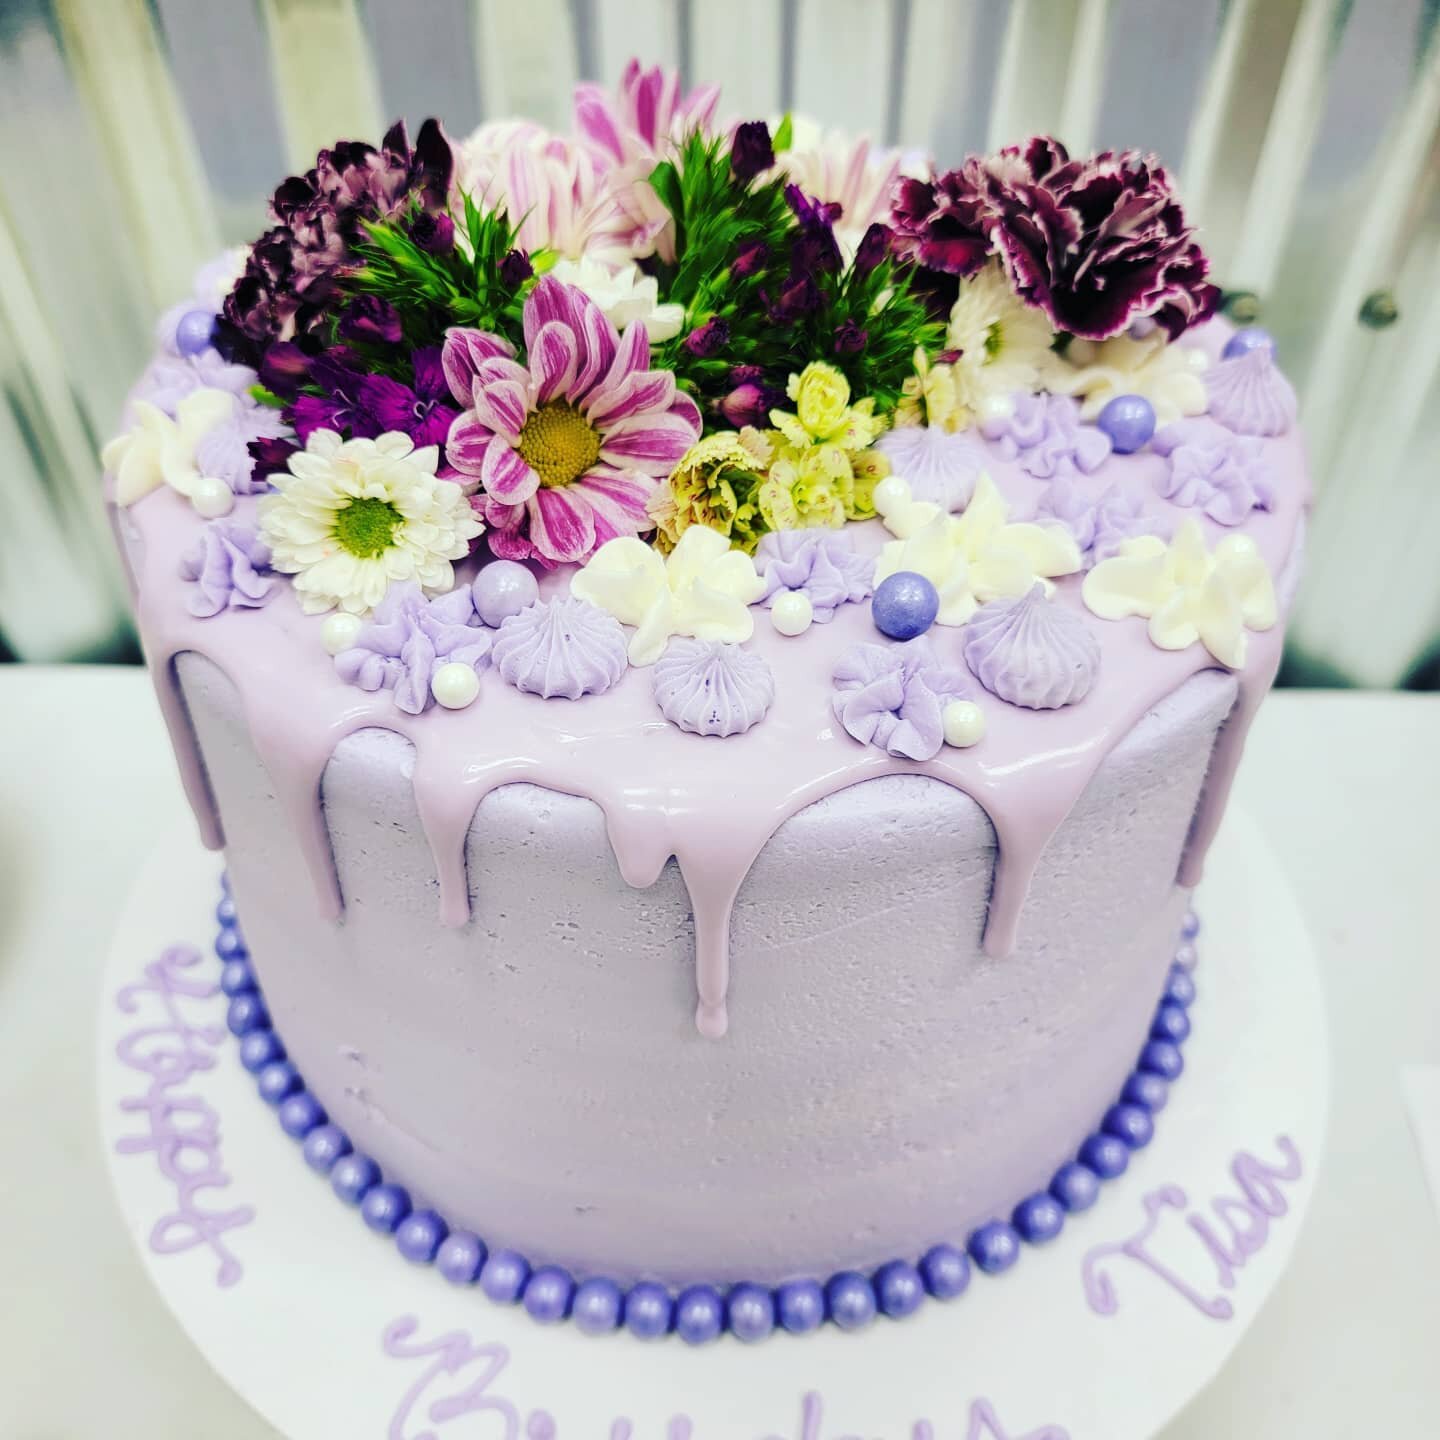 Who doesn't like purple?

#sweetnessinyourlife #birthdaycakes #cakesofinstagram #bestcakeson30a #seagroveplaza #southwalton #30alocalbusiness #madefromscratch #madewithlove #sweeton30a